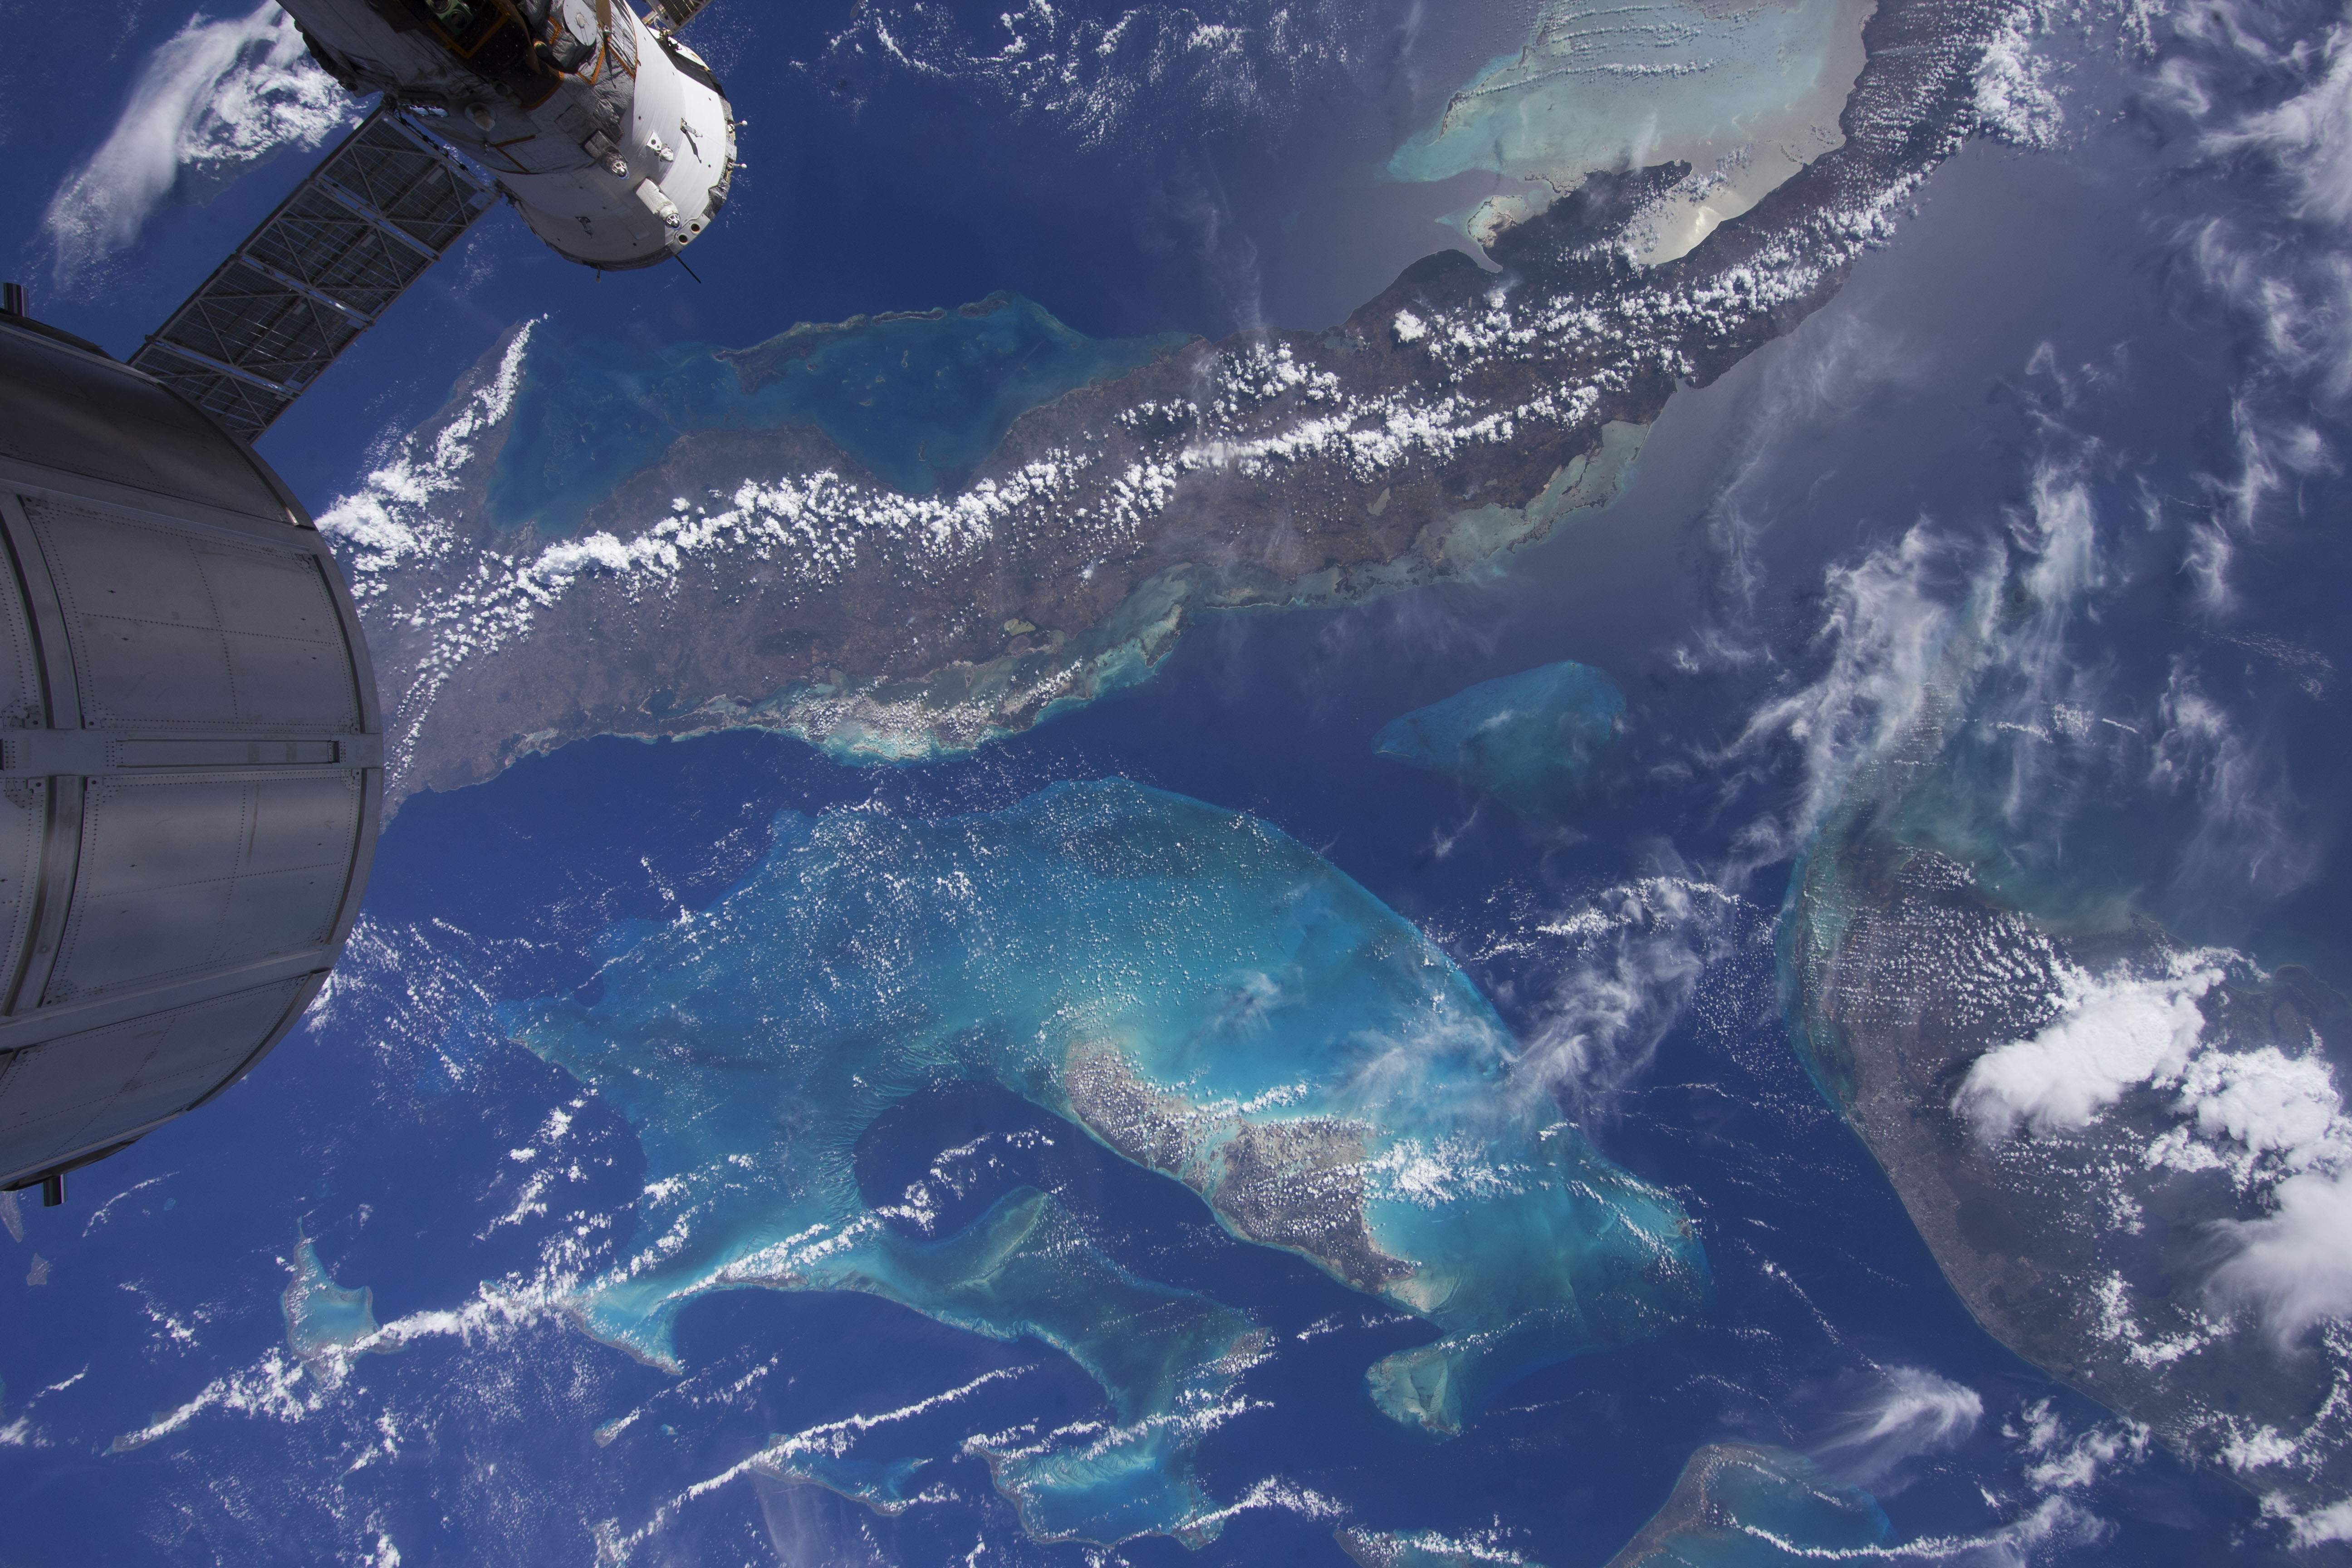 This shot from space shows the glowing Bahama Reefs on Earth in the new IMAX documentary "A Beautiful Planet." (IMAX)